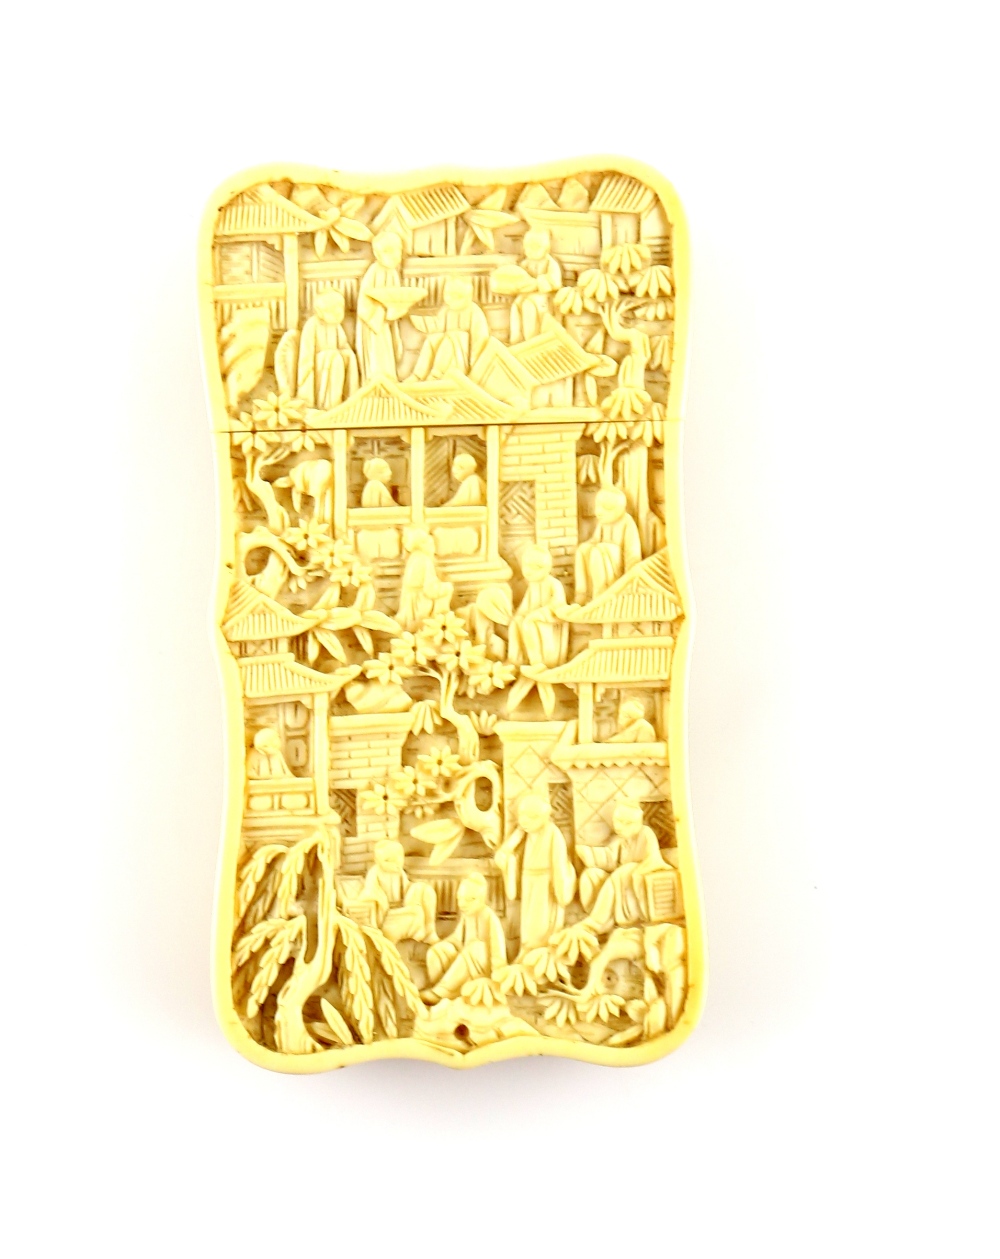 19th century Chinese carved ivory card case decorated with sea creatures on one side and figures - Image 2 of 2